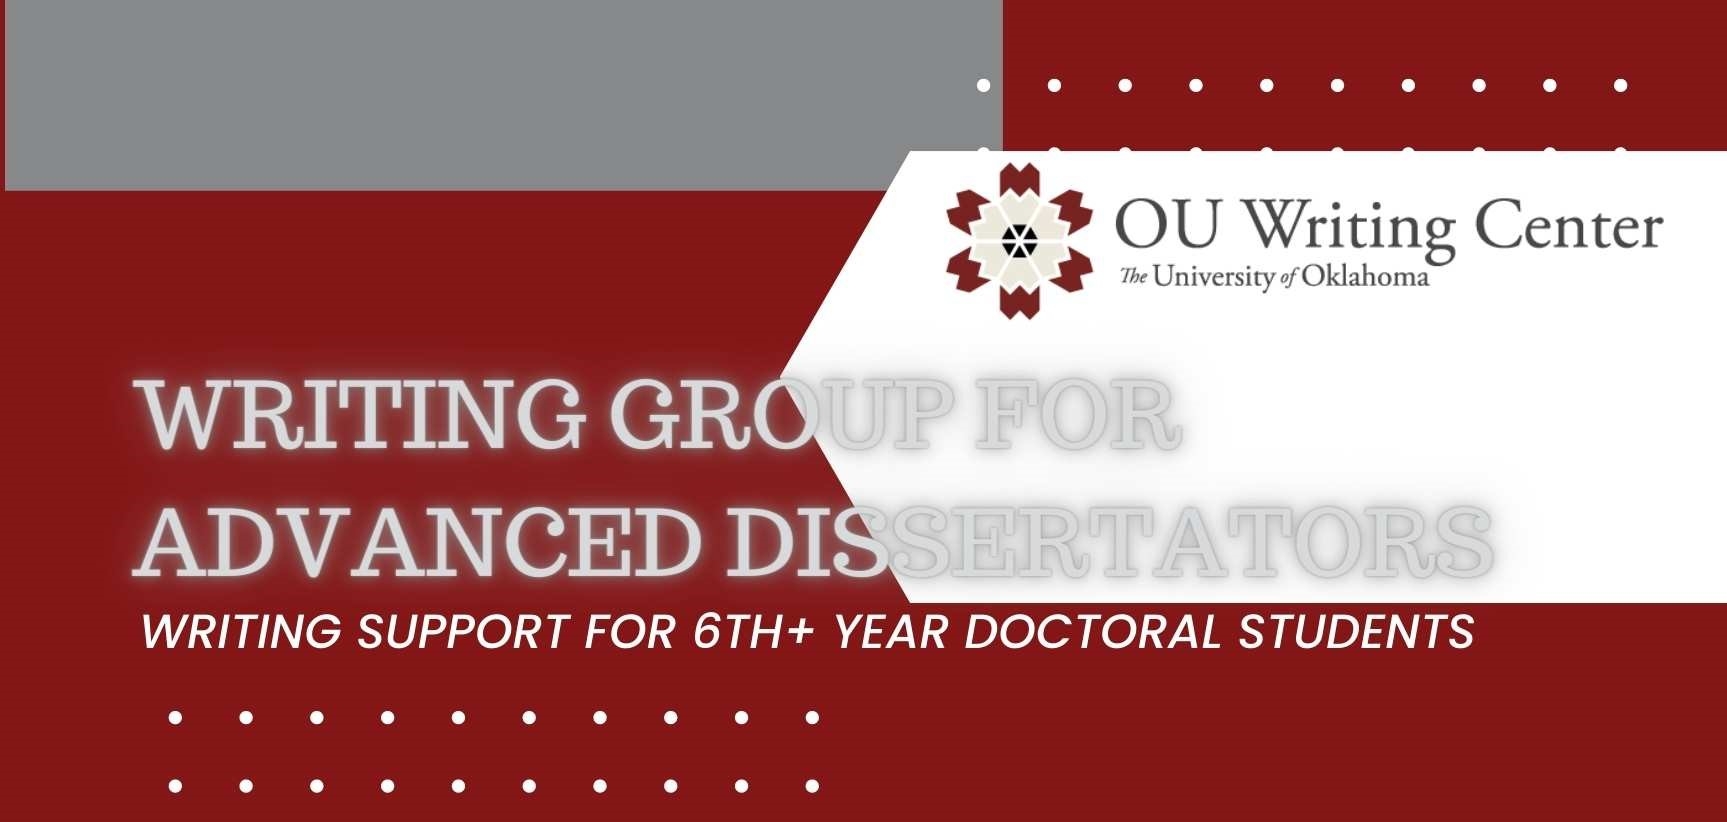 Crimson background with text stating writing group for advanced dissertators